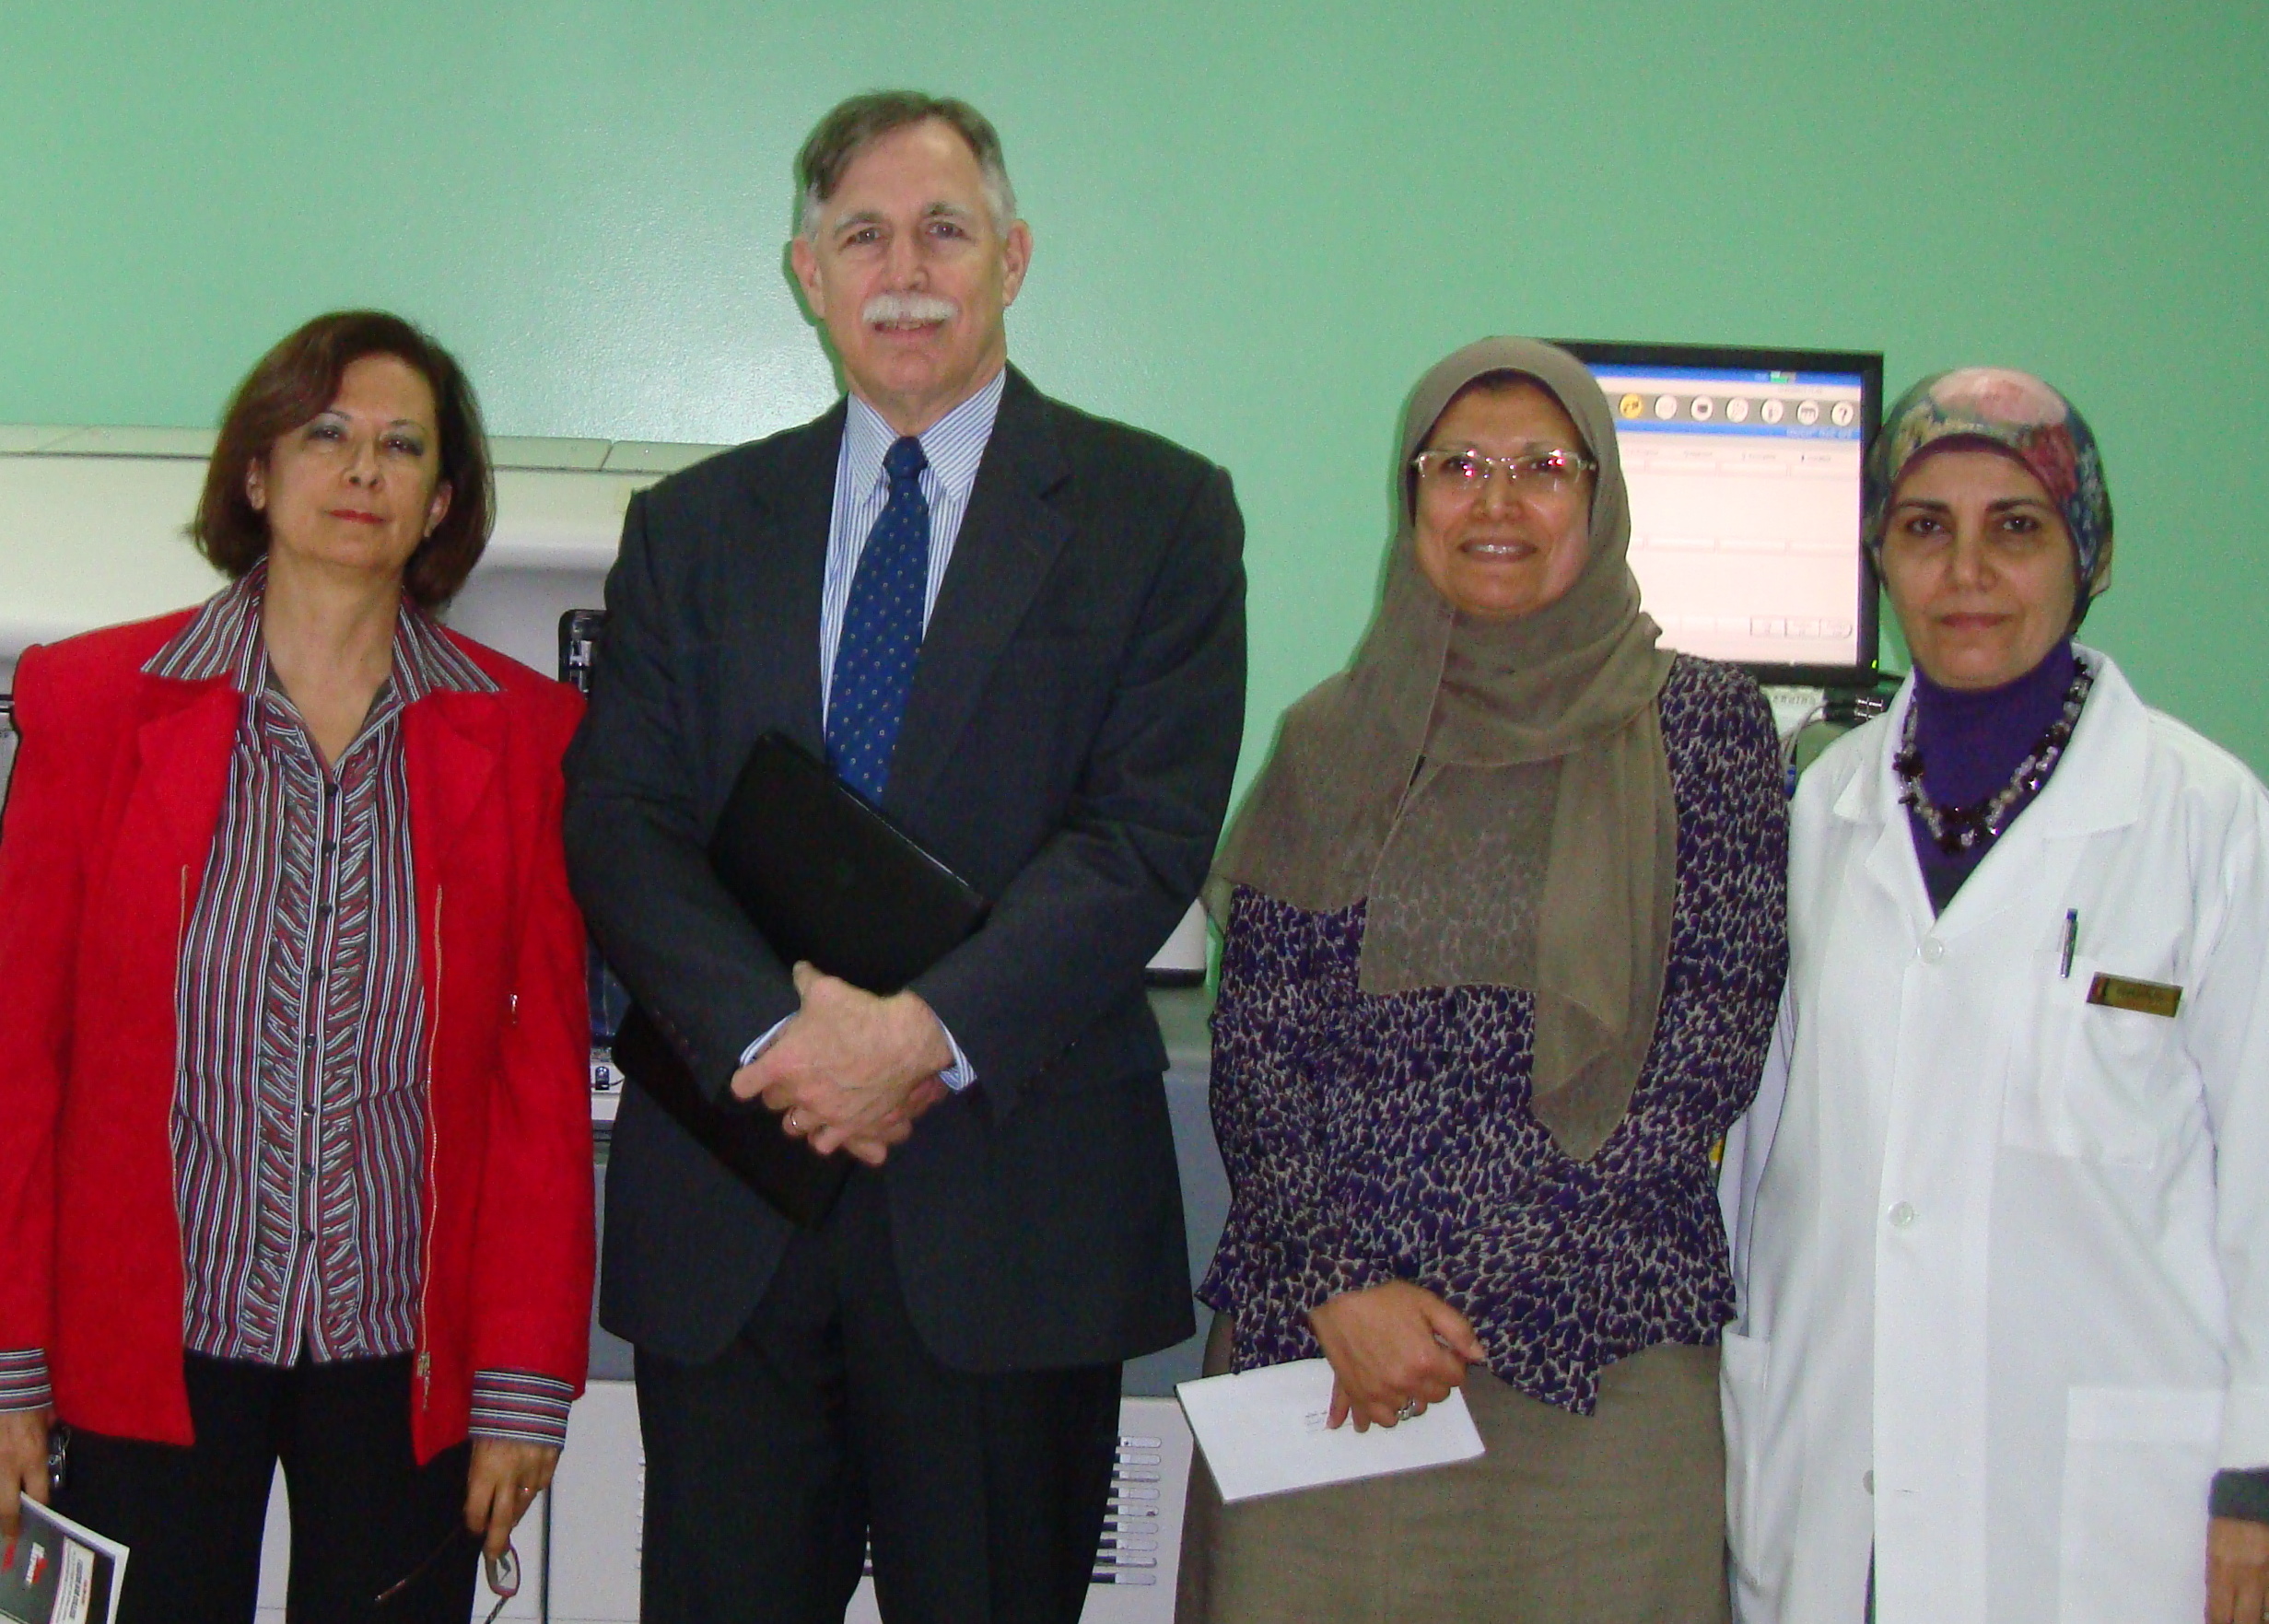 At the laboratory of Ain Shams Specialized Hospital in Cairo, Egypt (from L). The lab site visit included: Dr. Hanzada I. Abd El Fattah, Professor of Clinical Pathology and Clinical Chemistry; Robert Michel, Editor, Dark Daily; Dr. Dalia Helmi Faraq, Professor of Clinical Pathology; and Dr. Manal Z. Maran, Professor of Clinical Pathology and Immunology.